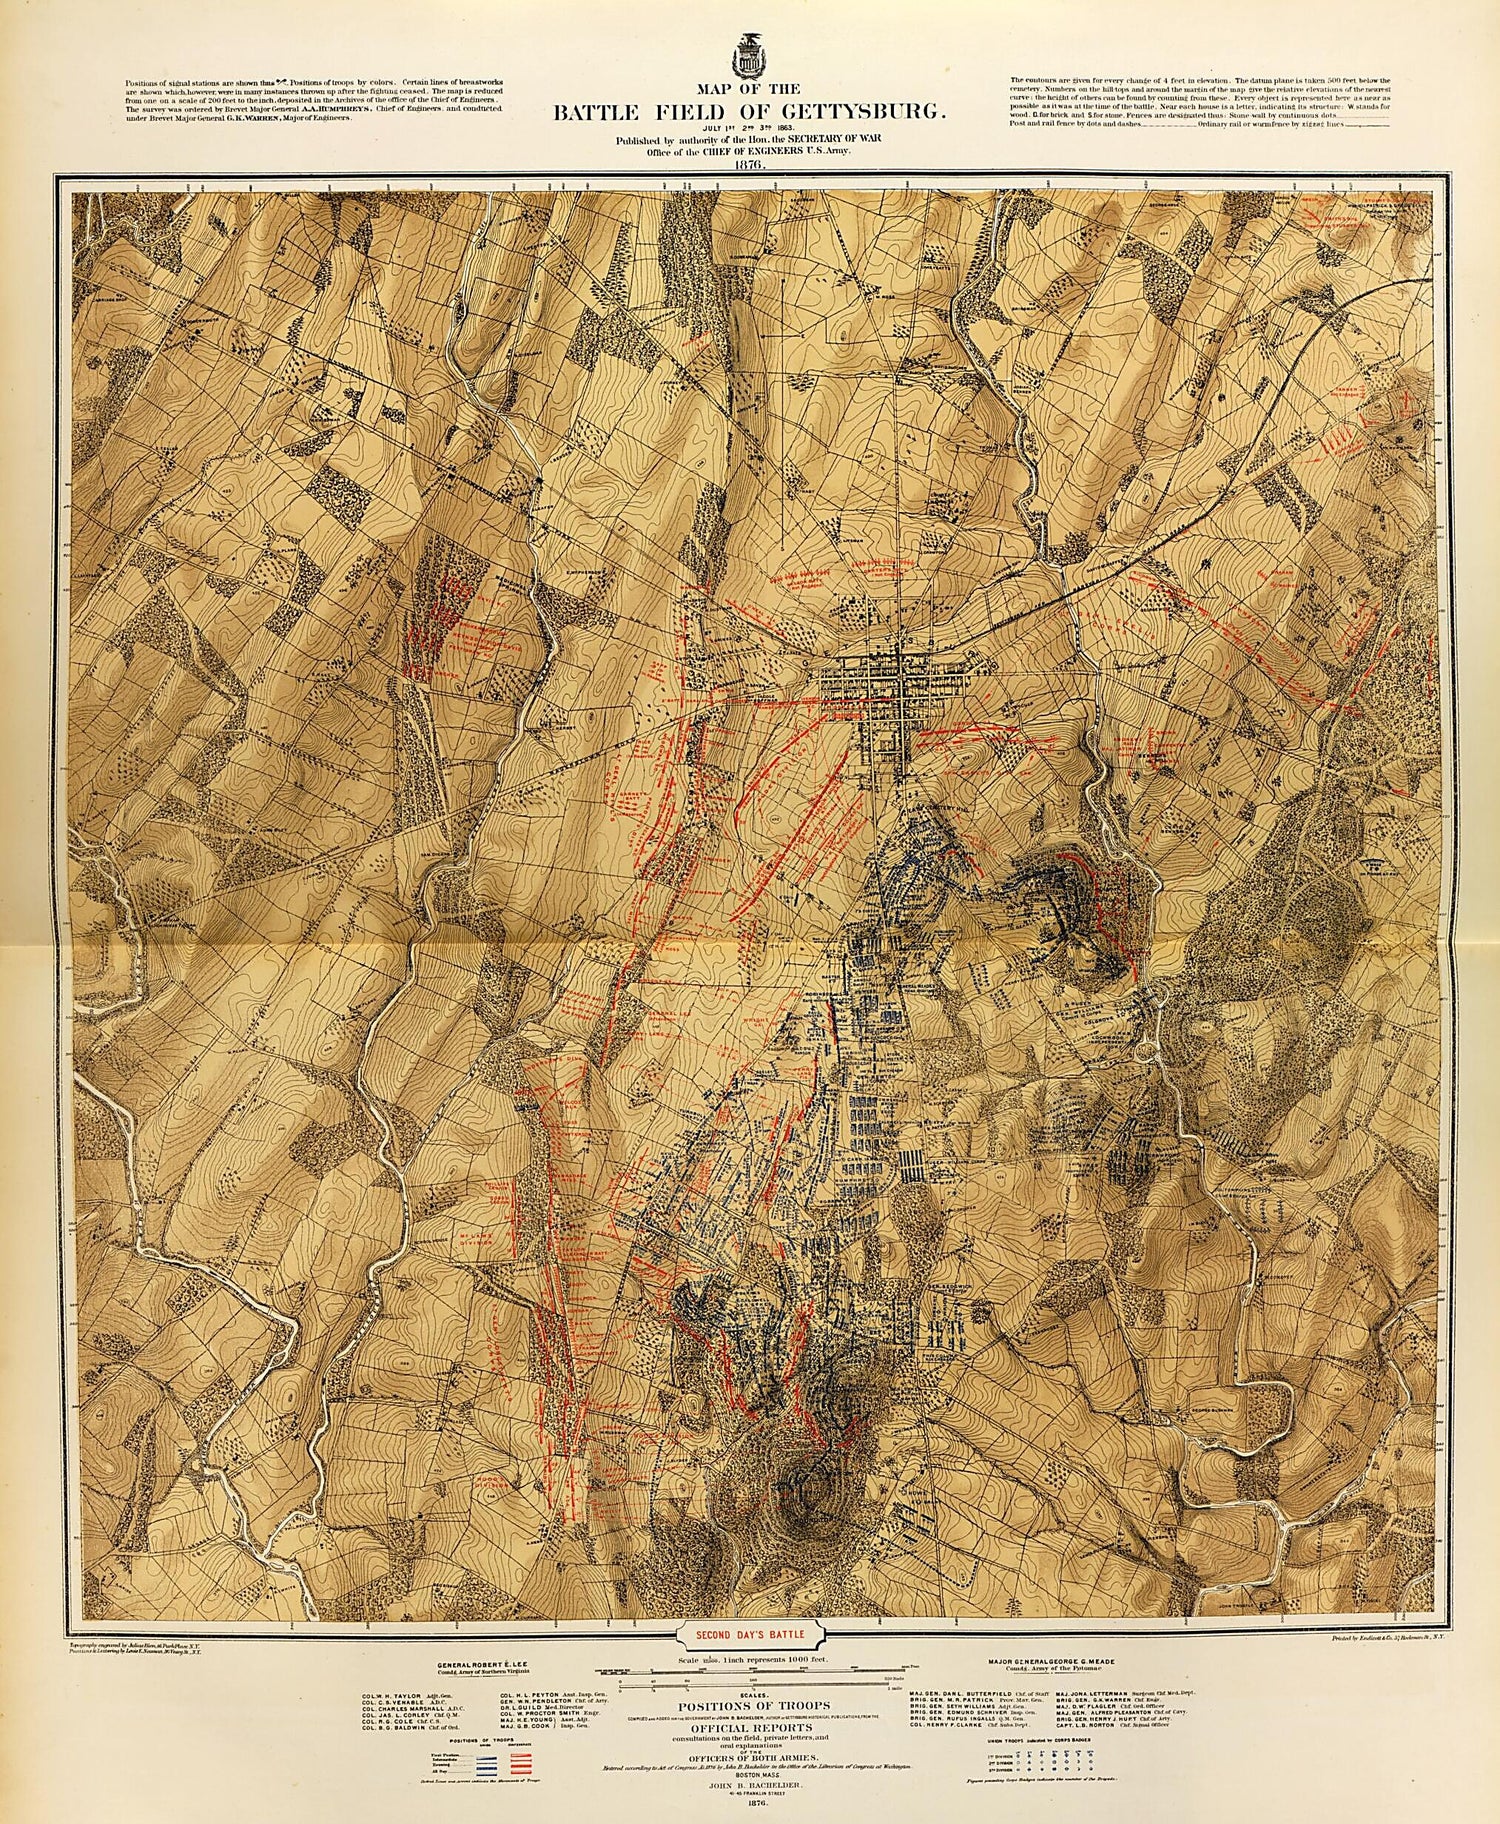 This old map of Map of the Battle Field of Gettysburg, Second Day&